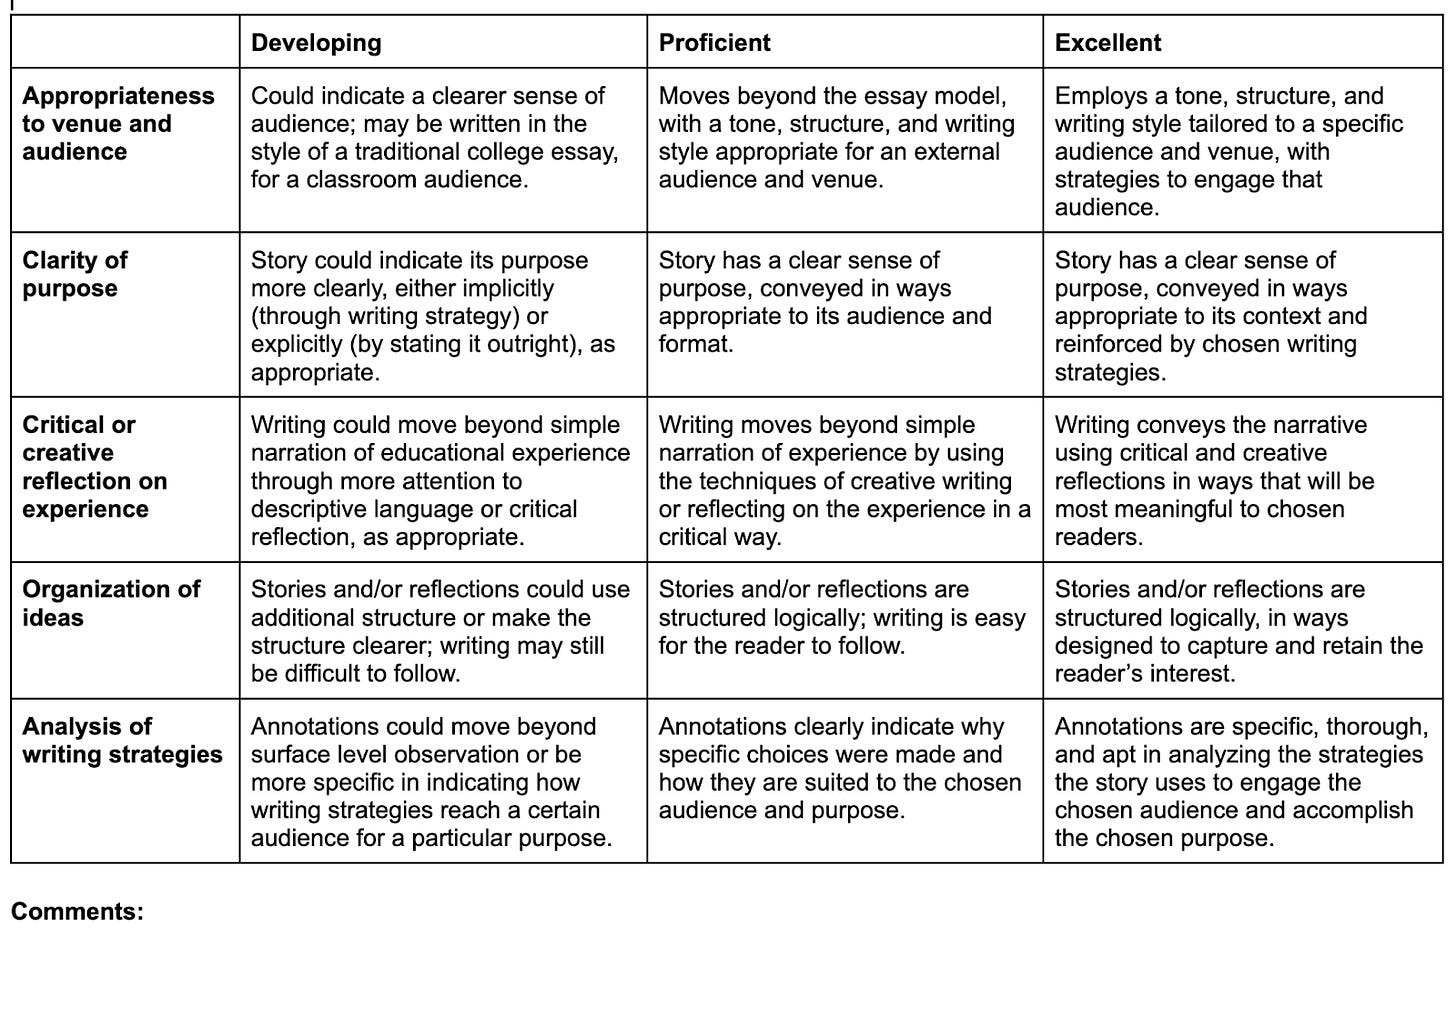 A rubric table with five rows of assessment criteria and three columns for markings, “Developing,” “Proficient,” and “Excellent.”